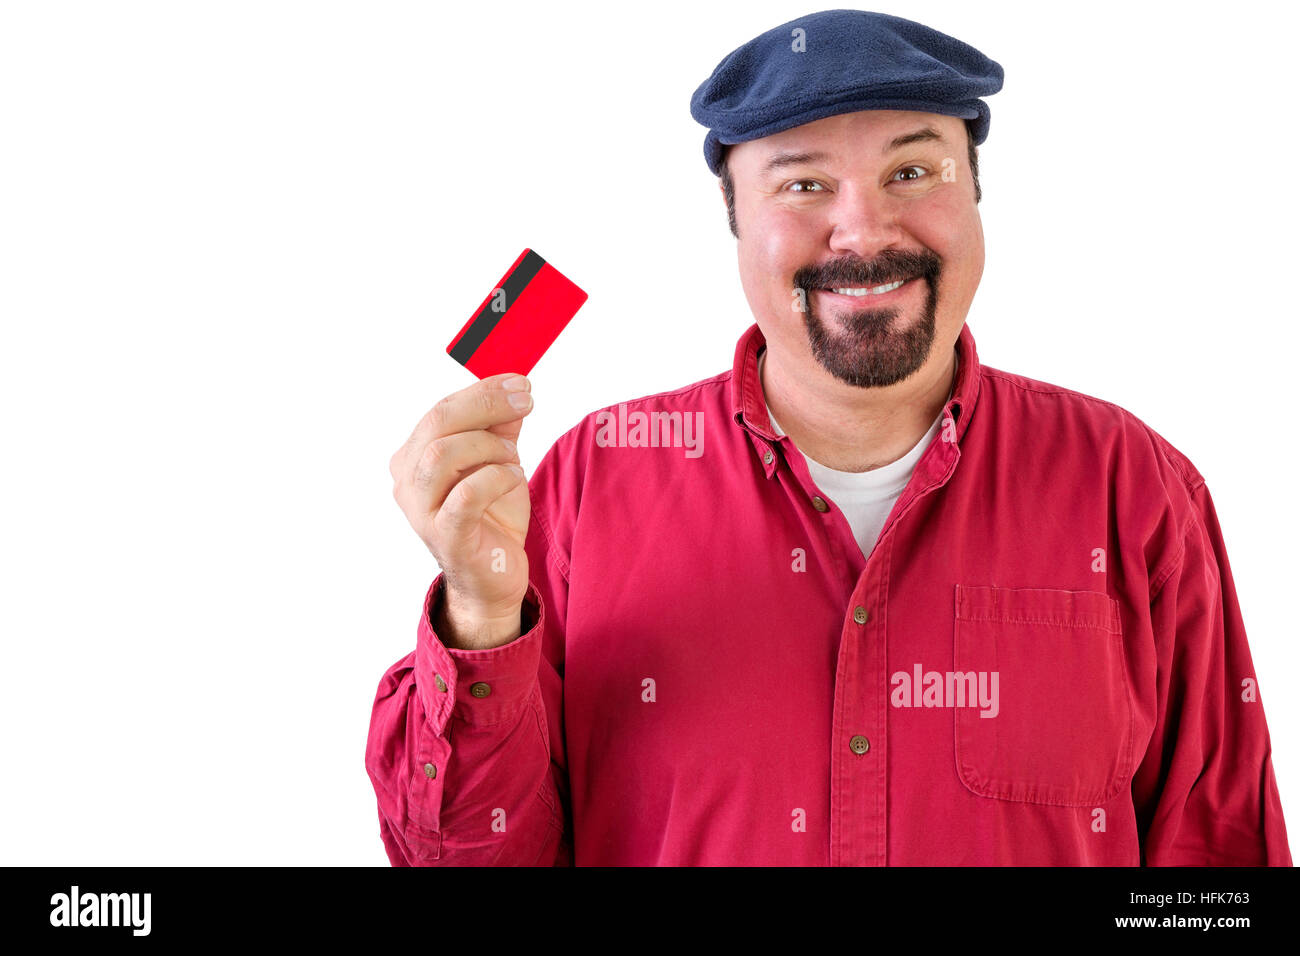 Motivated man with a bright idea holding a credit card up in his hand with a big smile as he imagines the opportunities that it opens up for him if he Stock Photo